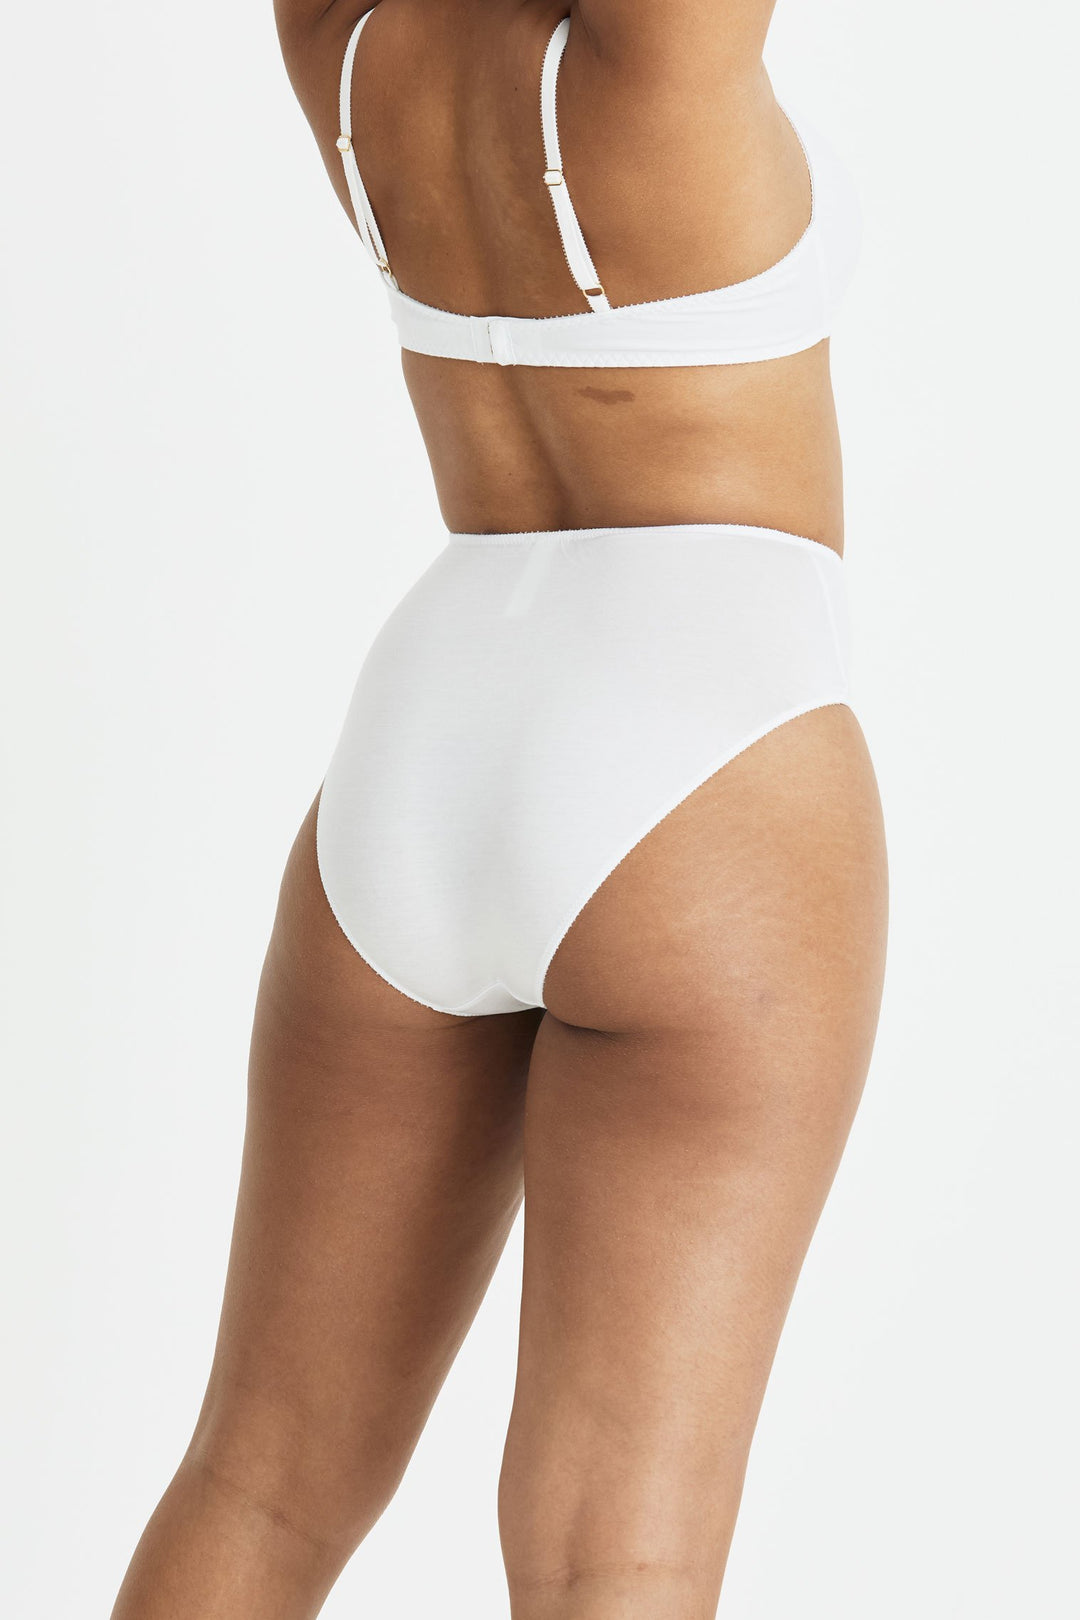 Videris Lingerie high waist knicker in white TENCEL™ with cheeky bottom coverage